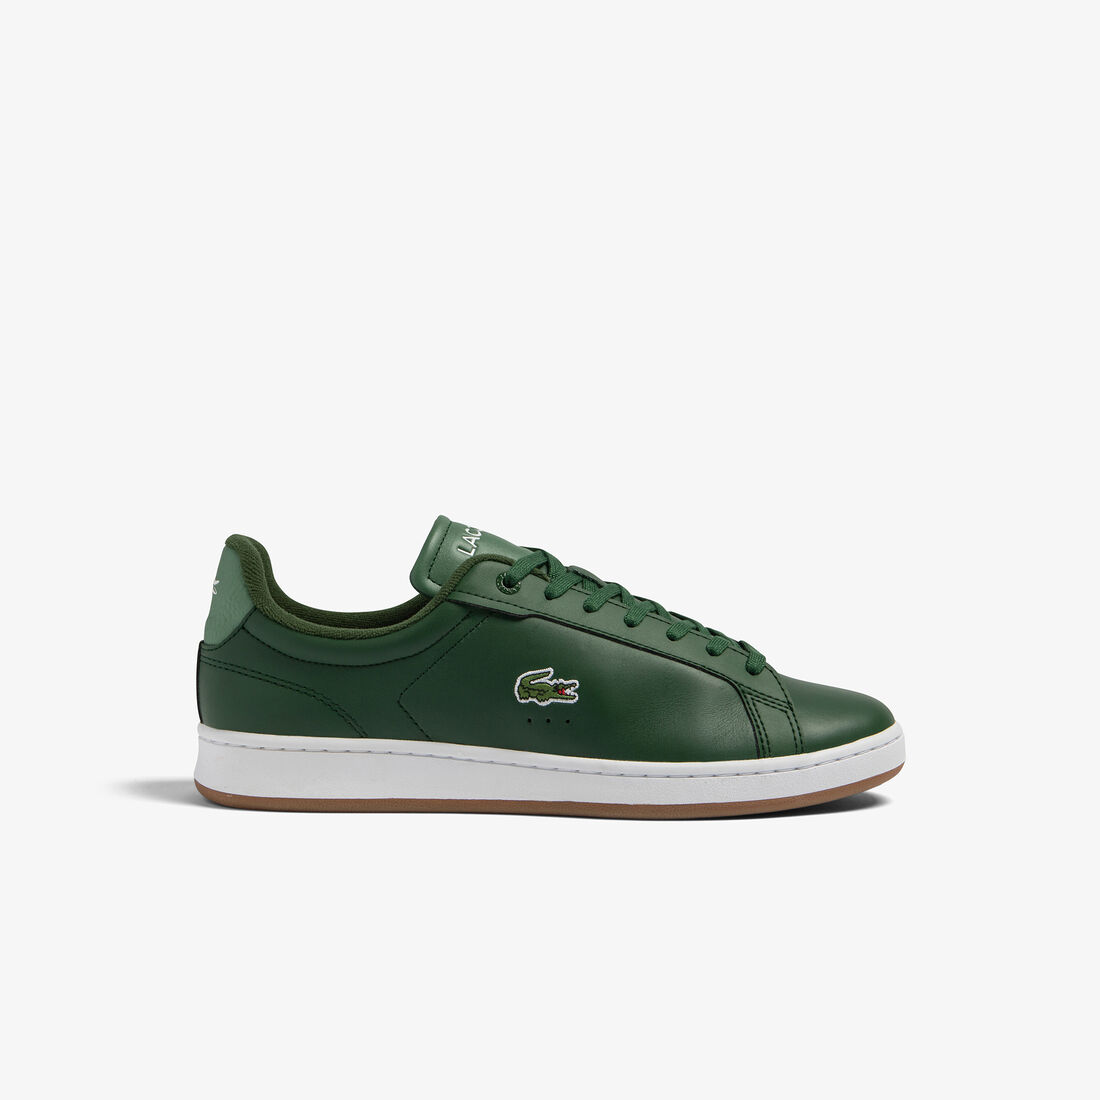 Men's Lacoste Carnaby Pro Leather Gum Sole Trainers